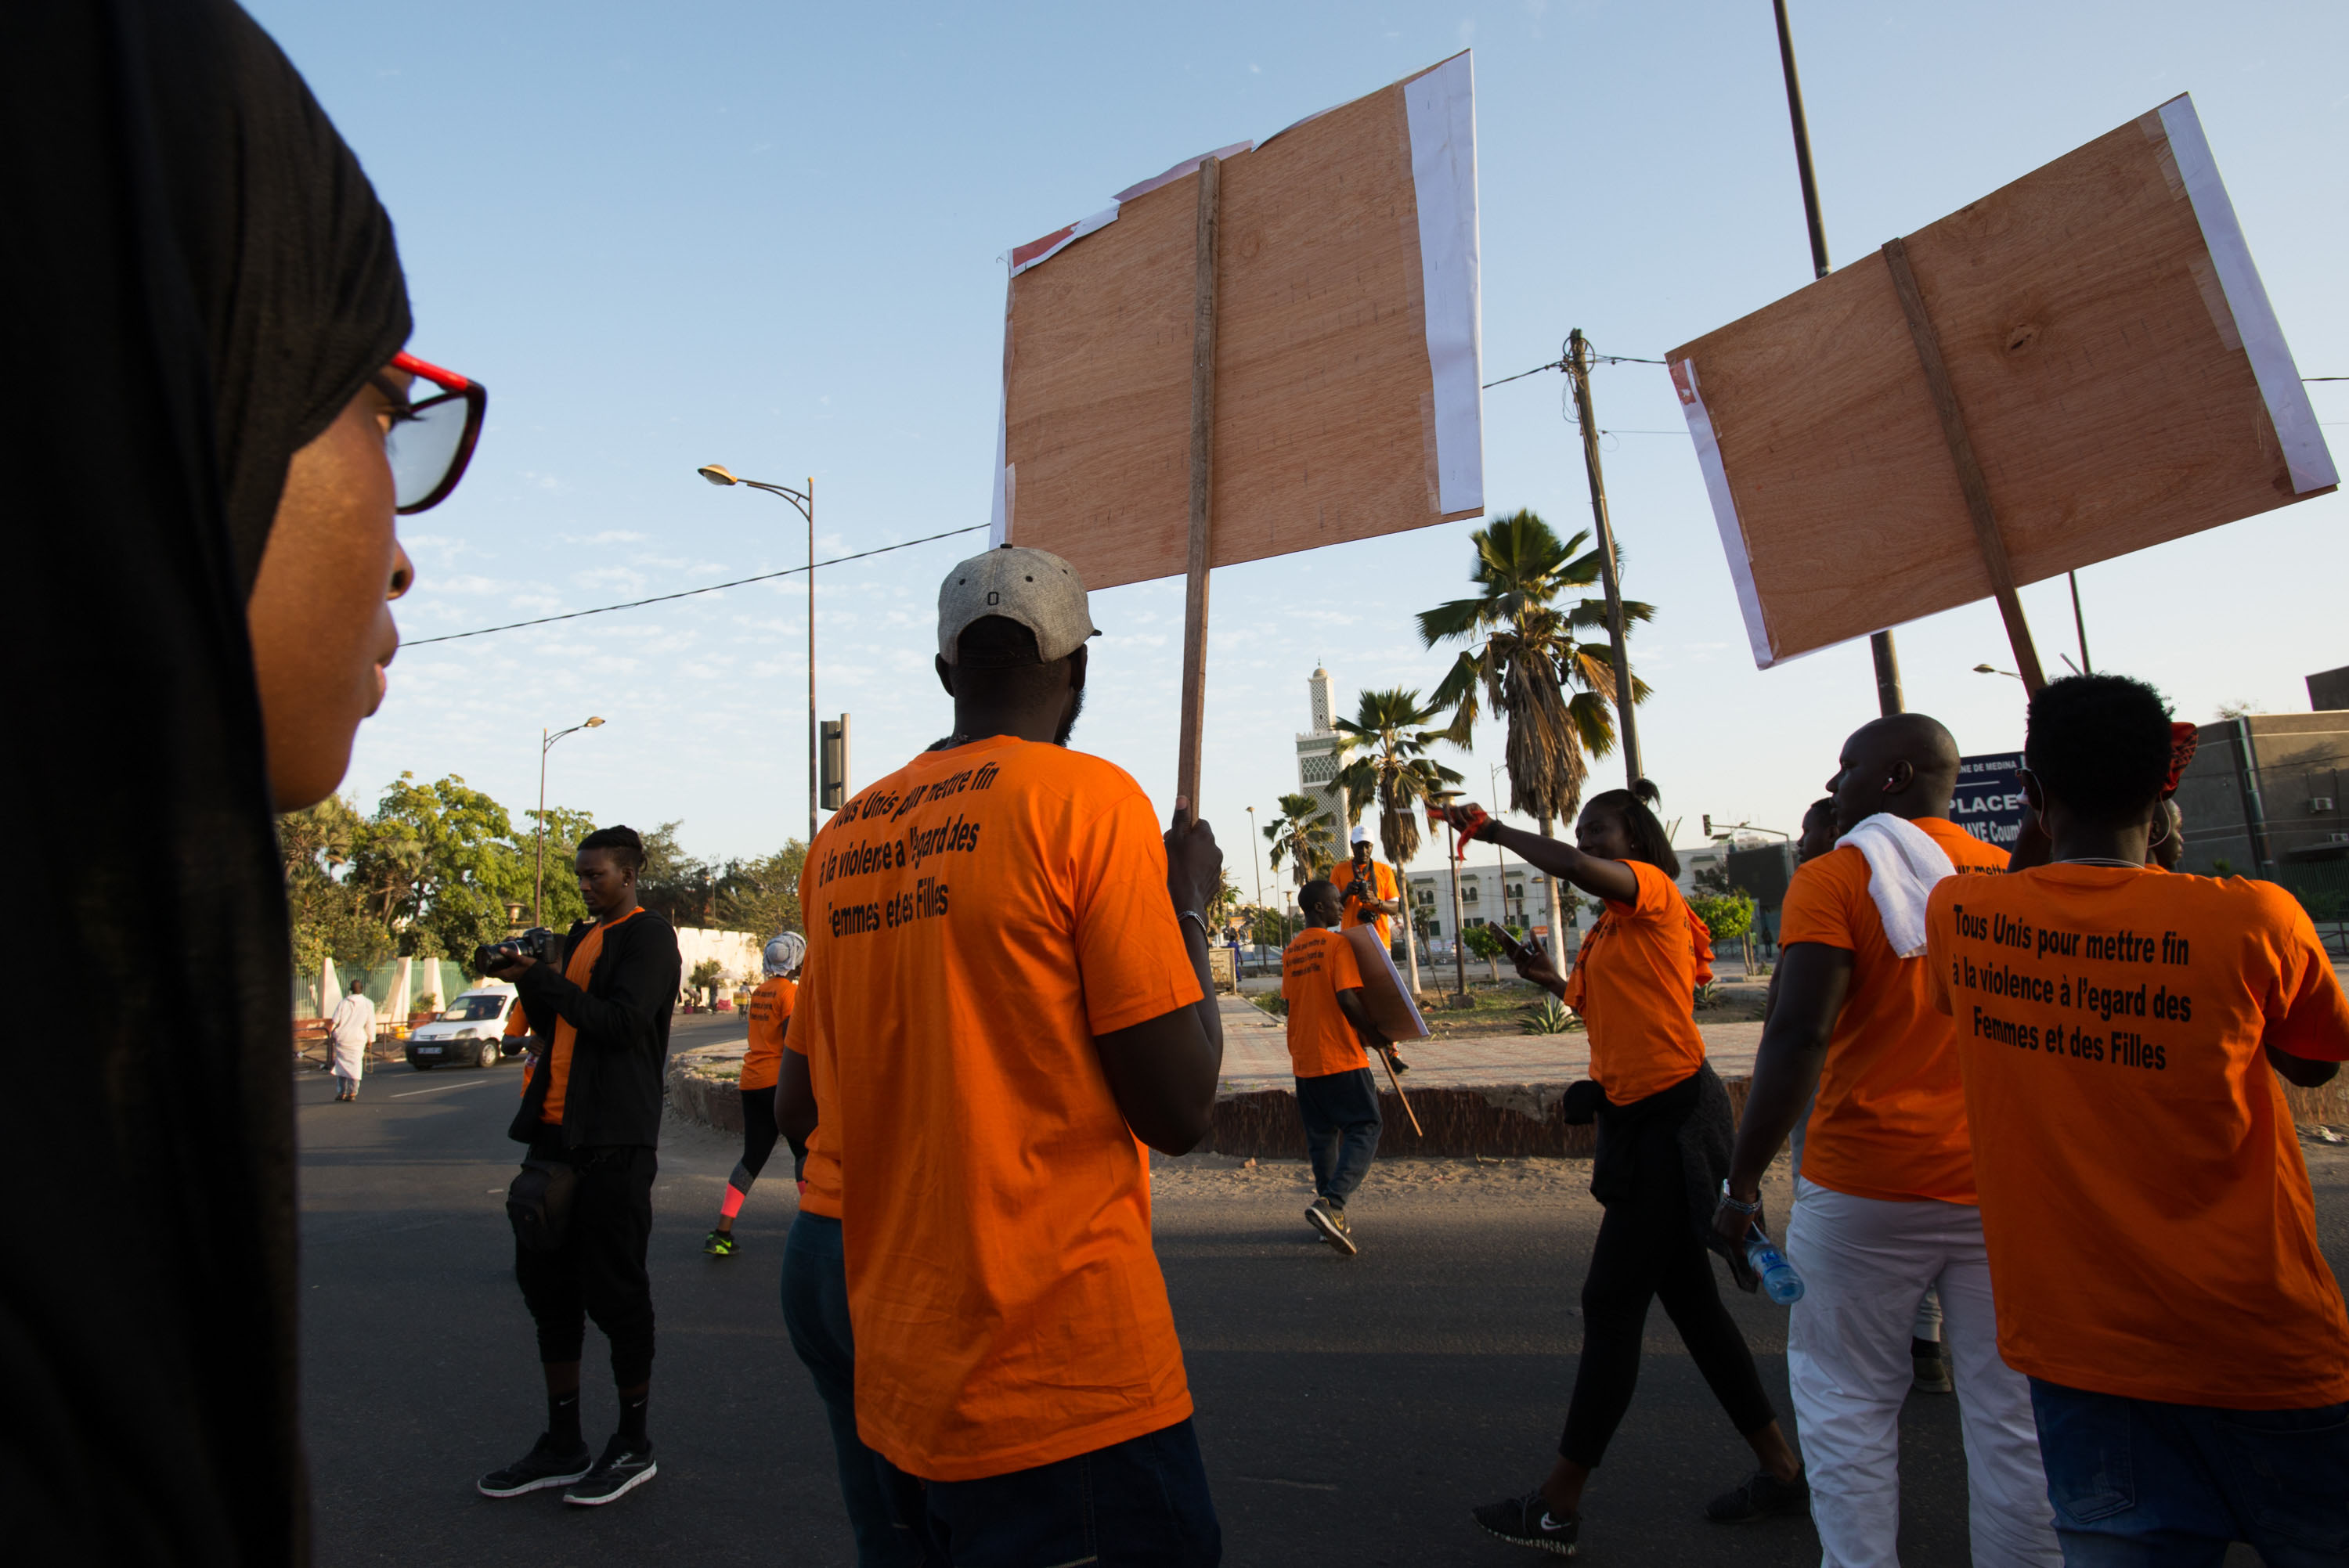 Demonstrators from various groups organizing to end violence against women march through central Dakar on Sunday, December 9.